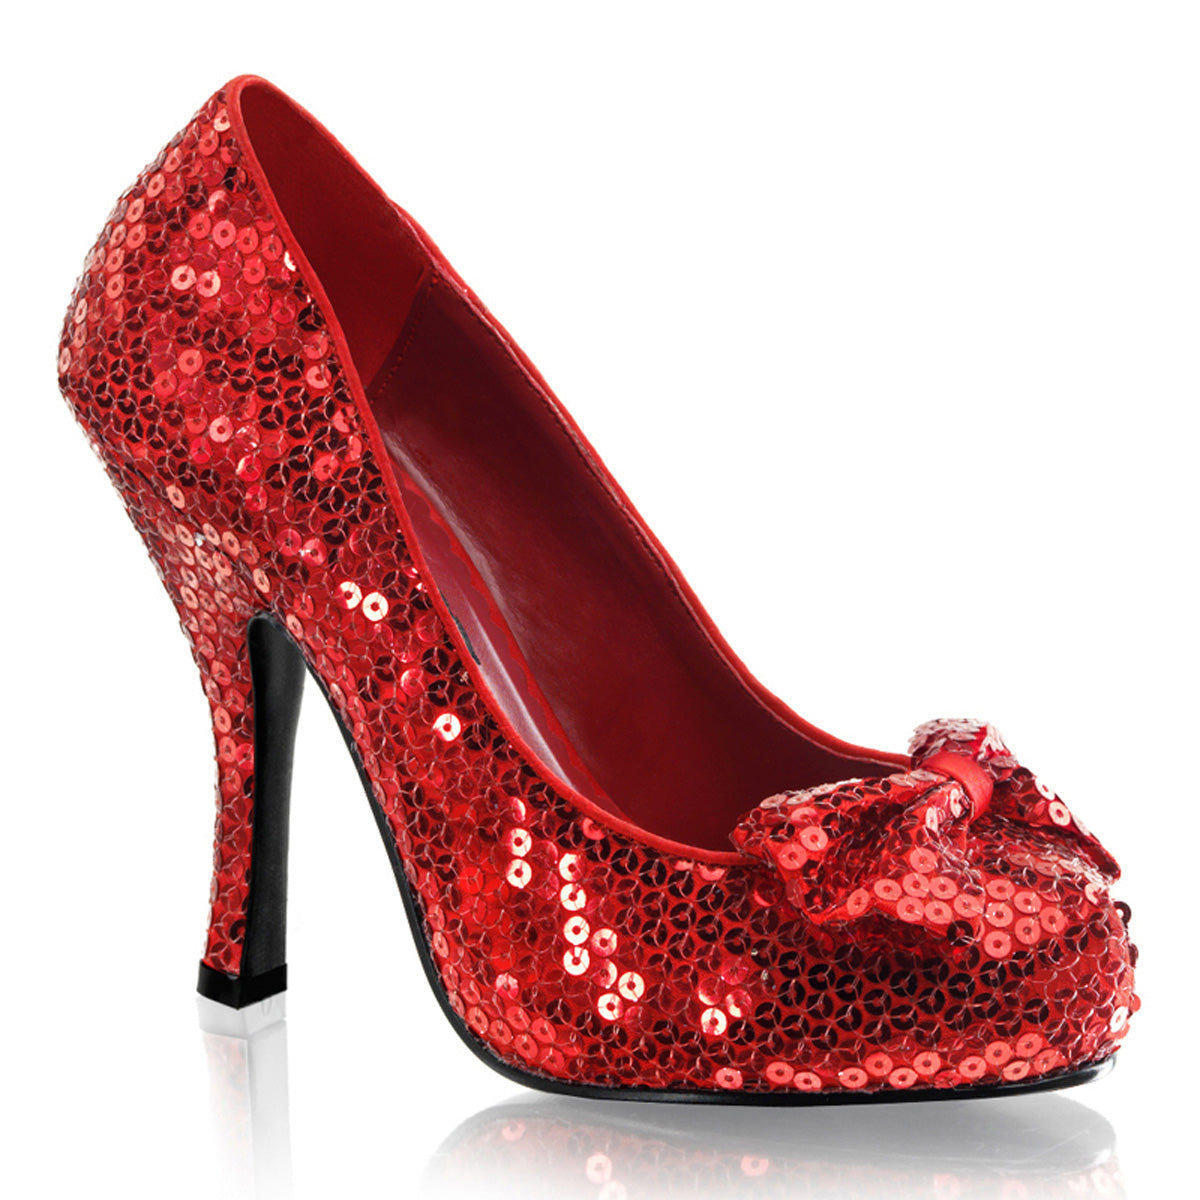 OZ-06 Pleasers Funtasma 4.5 Inch Heel Red Sequins Women's Sexy Shoes